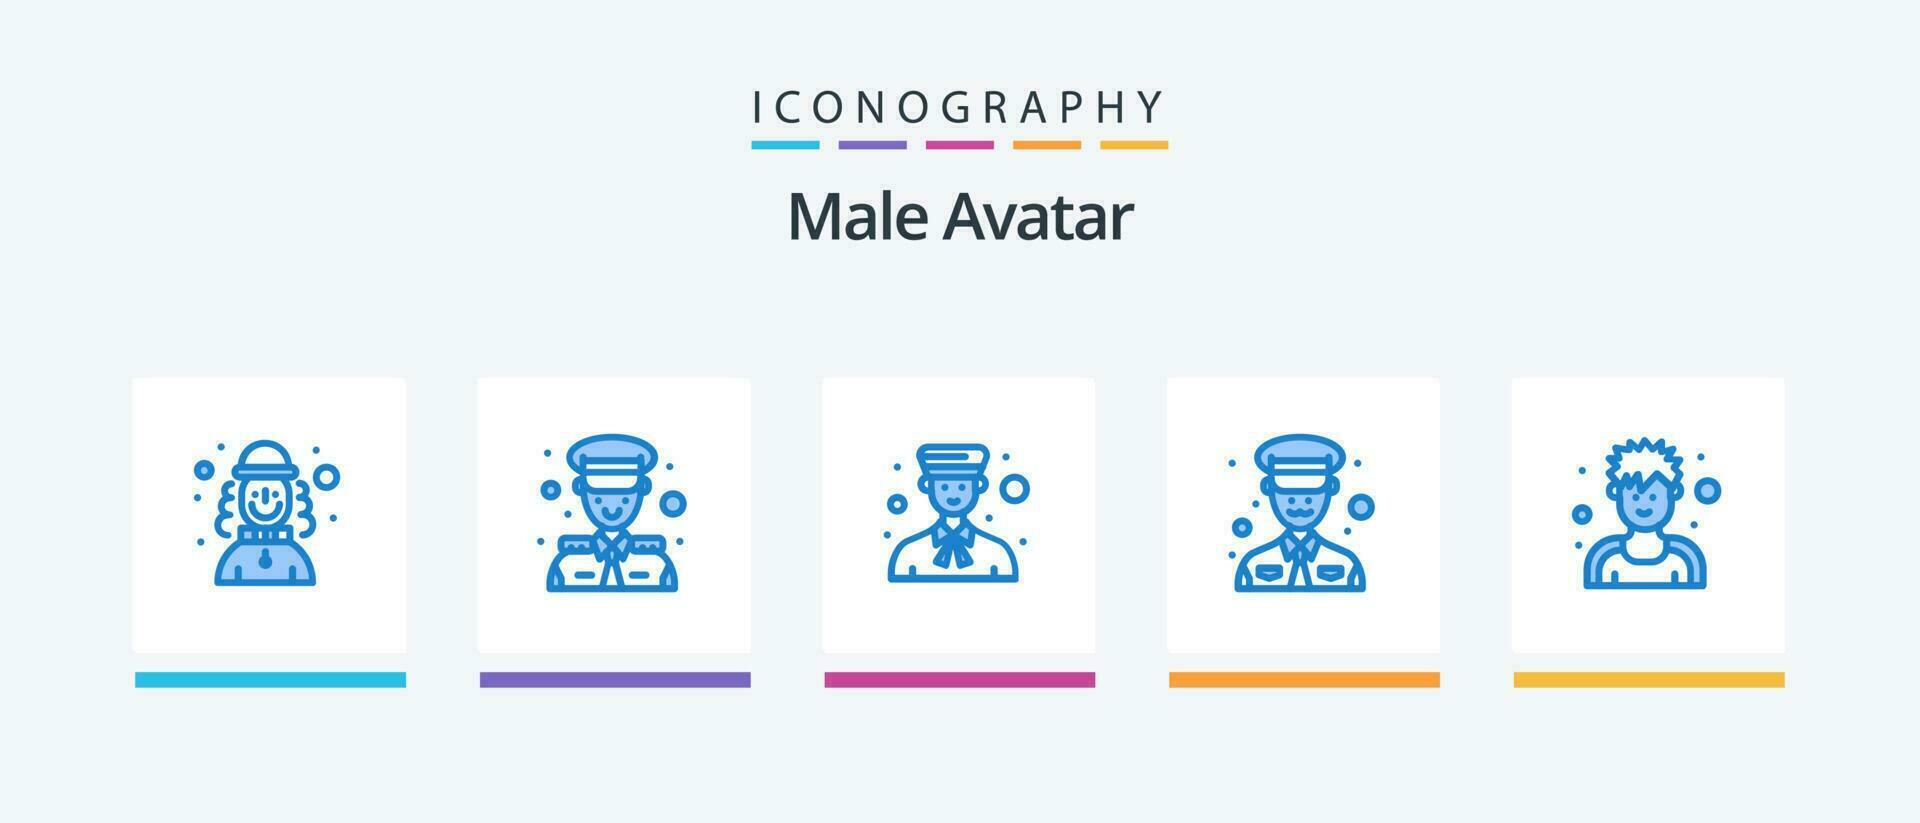 Male Avatar Blue 5 Icon Pack Including exerciser. police. avatar. military. professional. Creative Icons Design vector